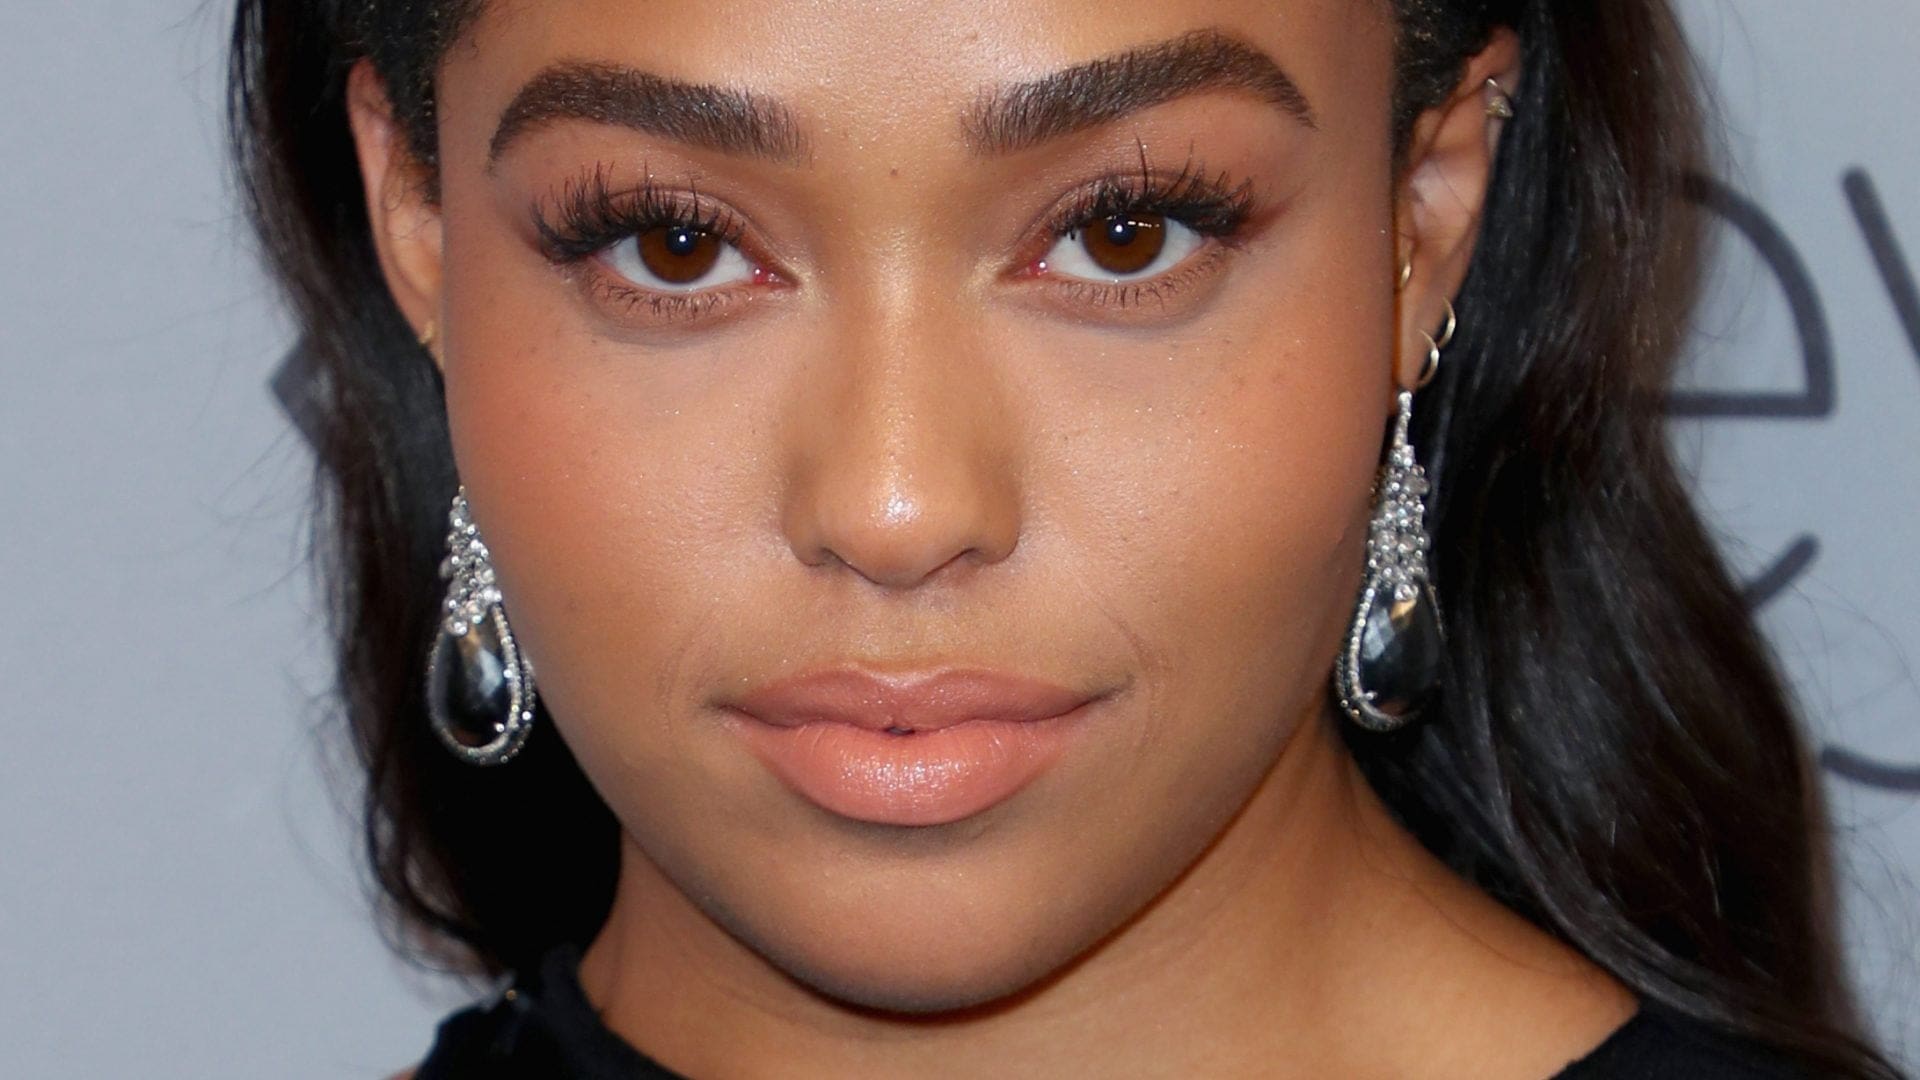 Jordyn Woods Shows Off Her Symmetrical Face, And Fans Are Stunned - Check Out Her Clip